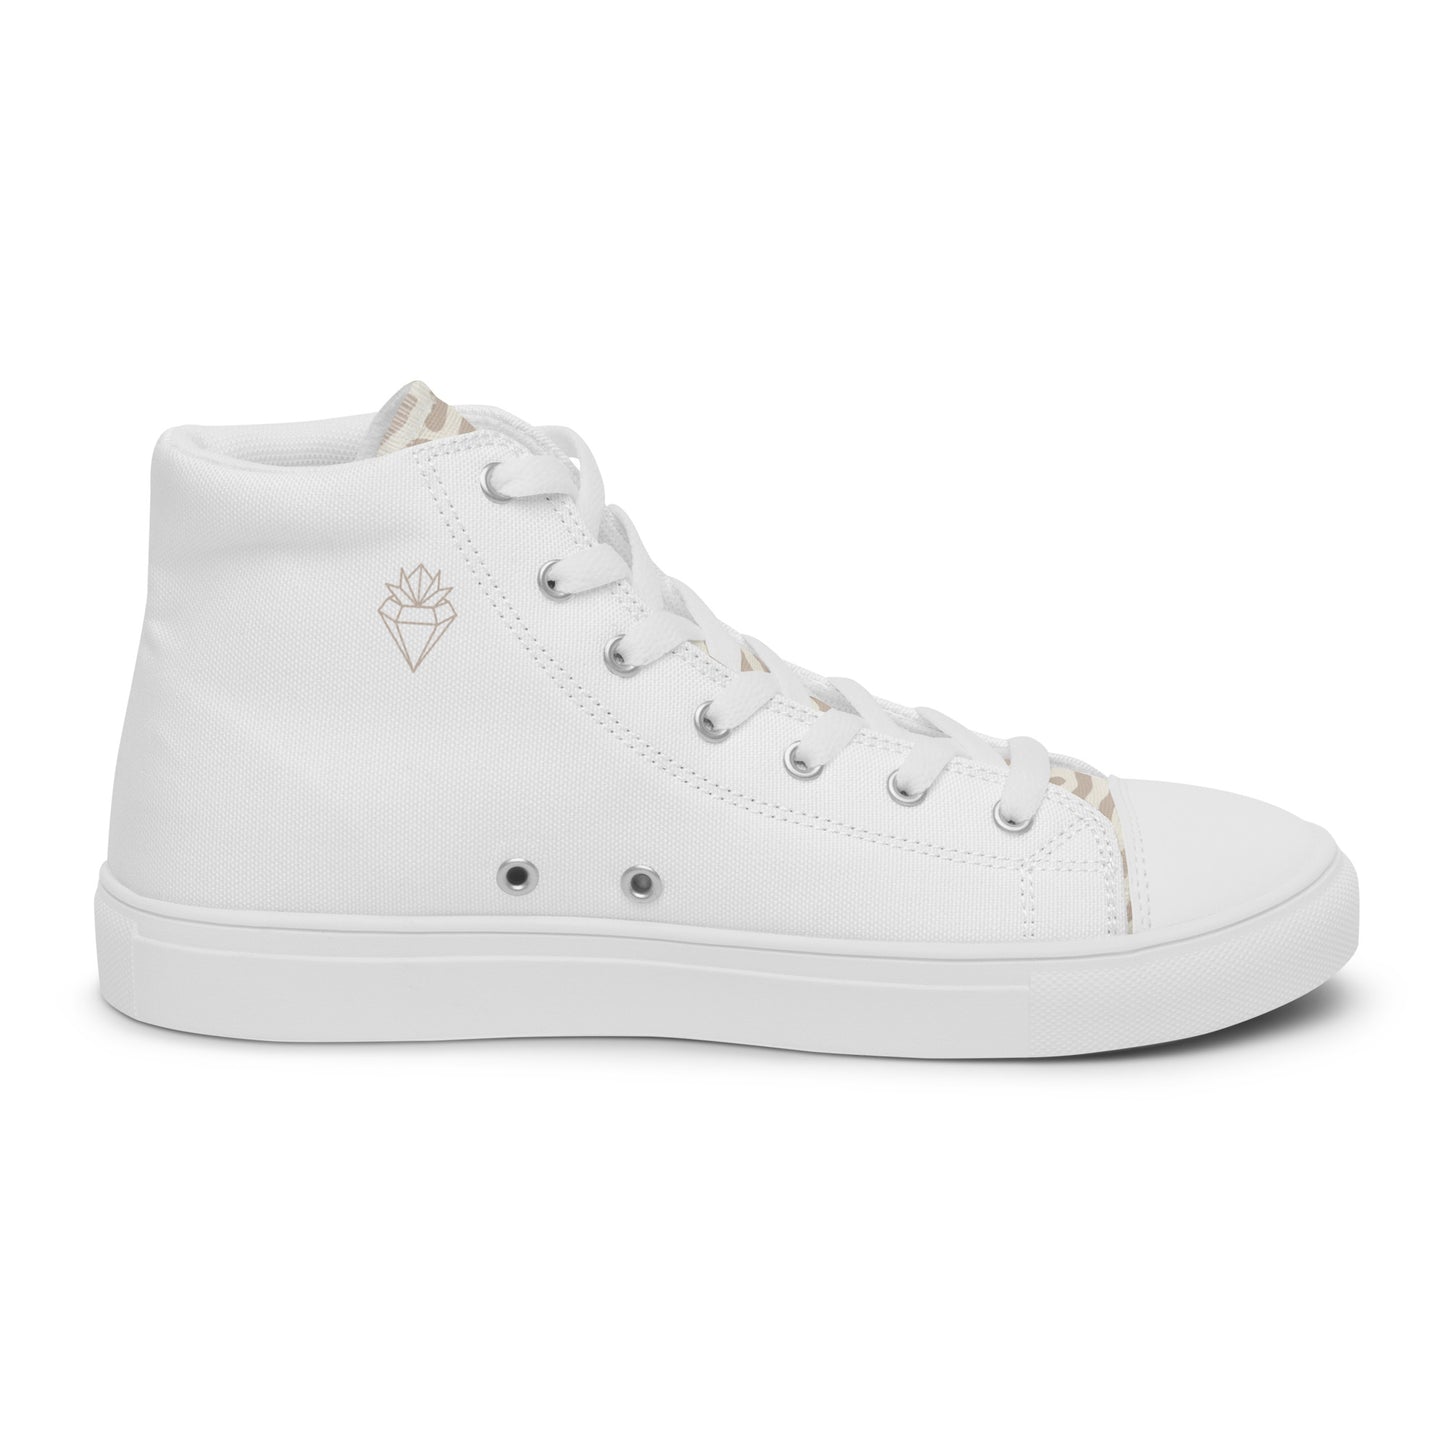 Crowned Diamond Men’s high top canvas shoes